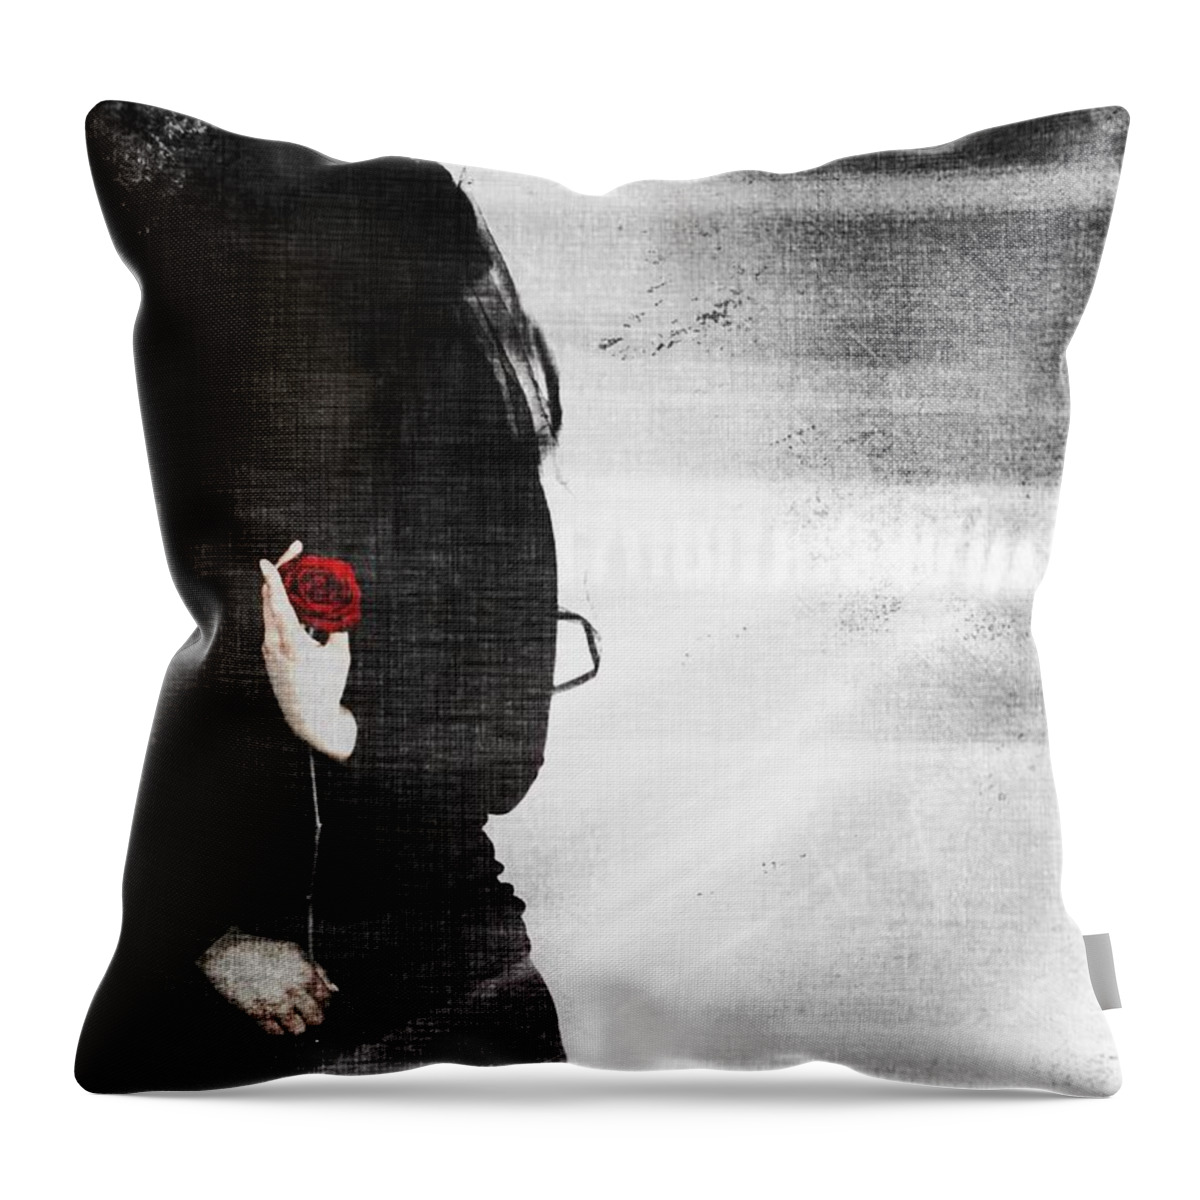  Throw Pillow featuring the photograph He Took My Sense Of Self by Jessica S